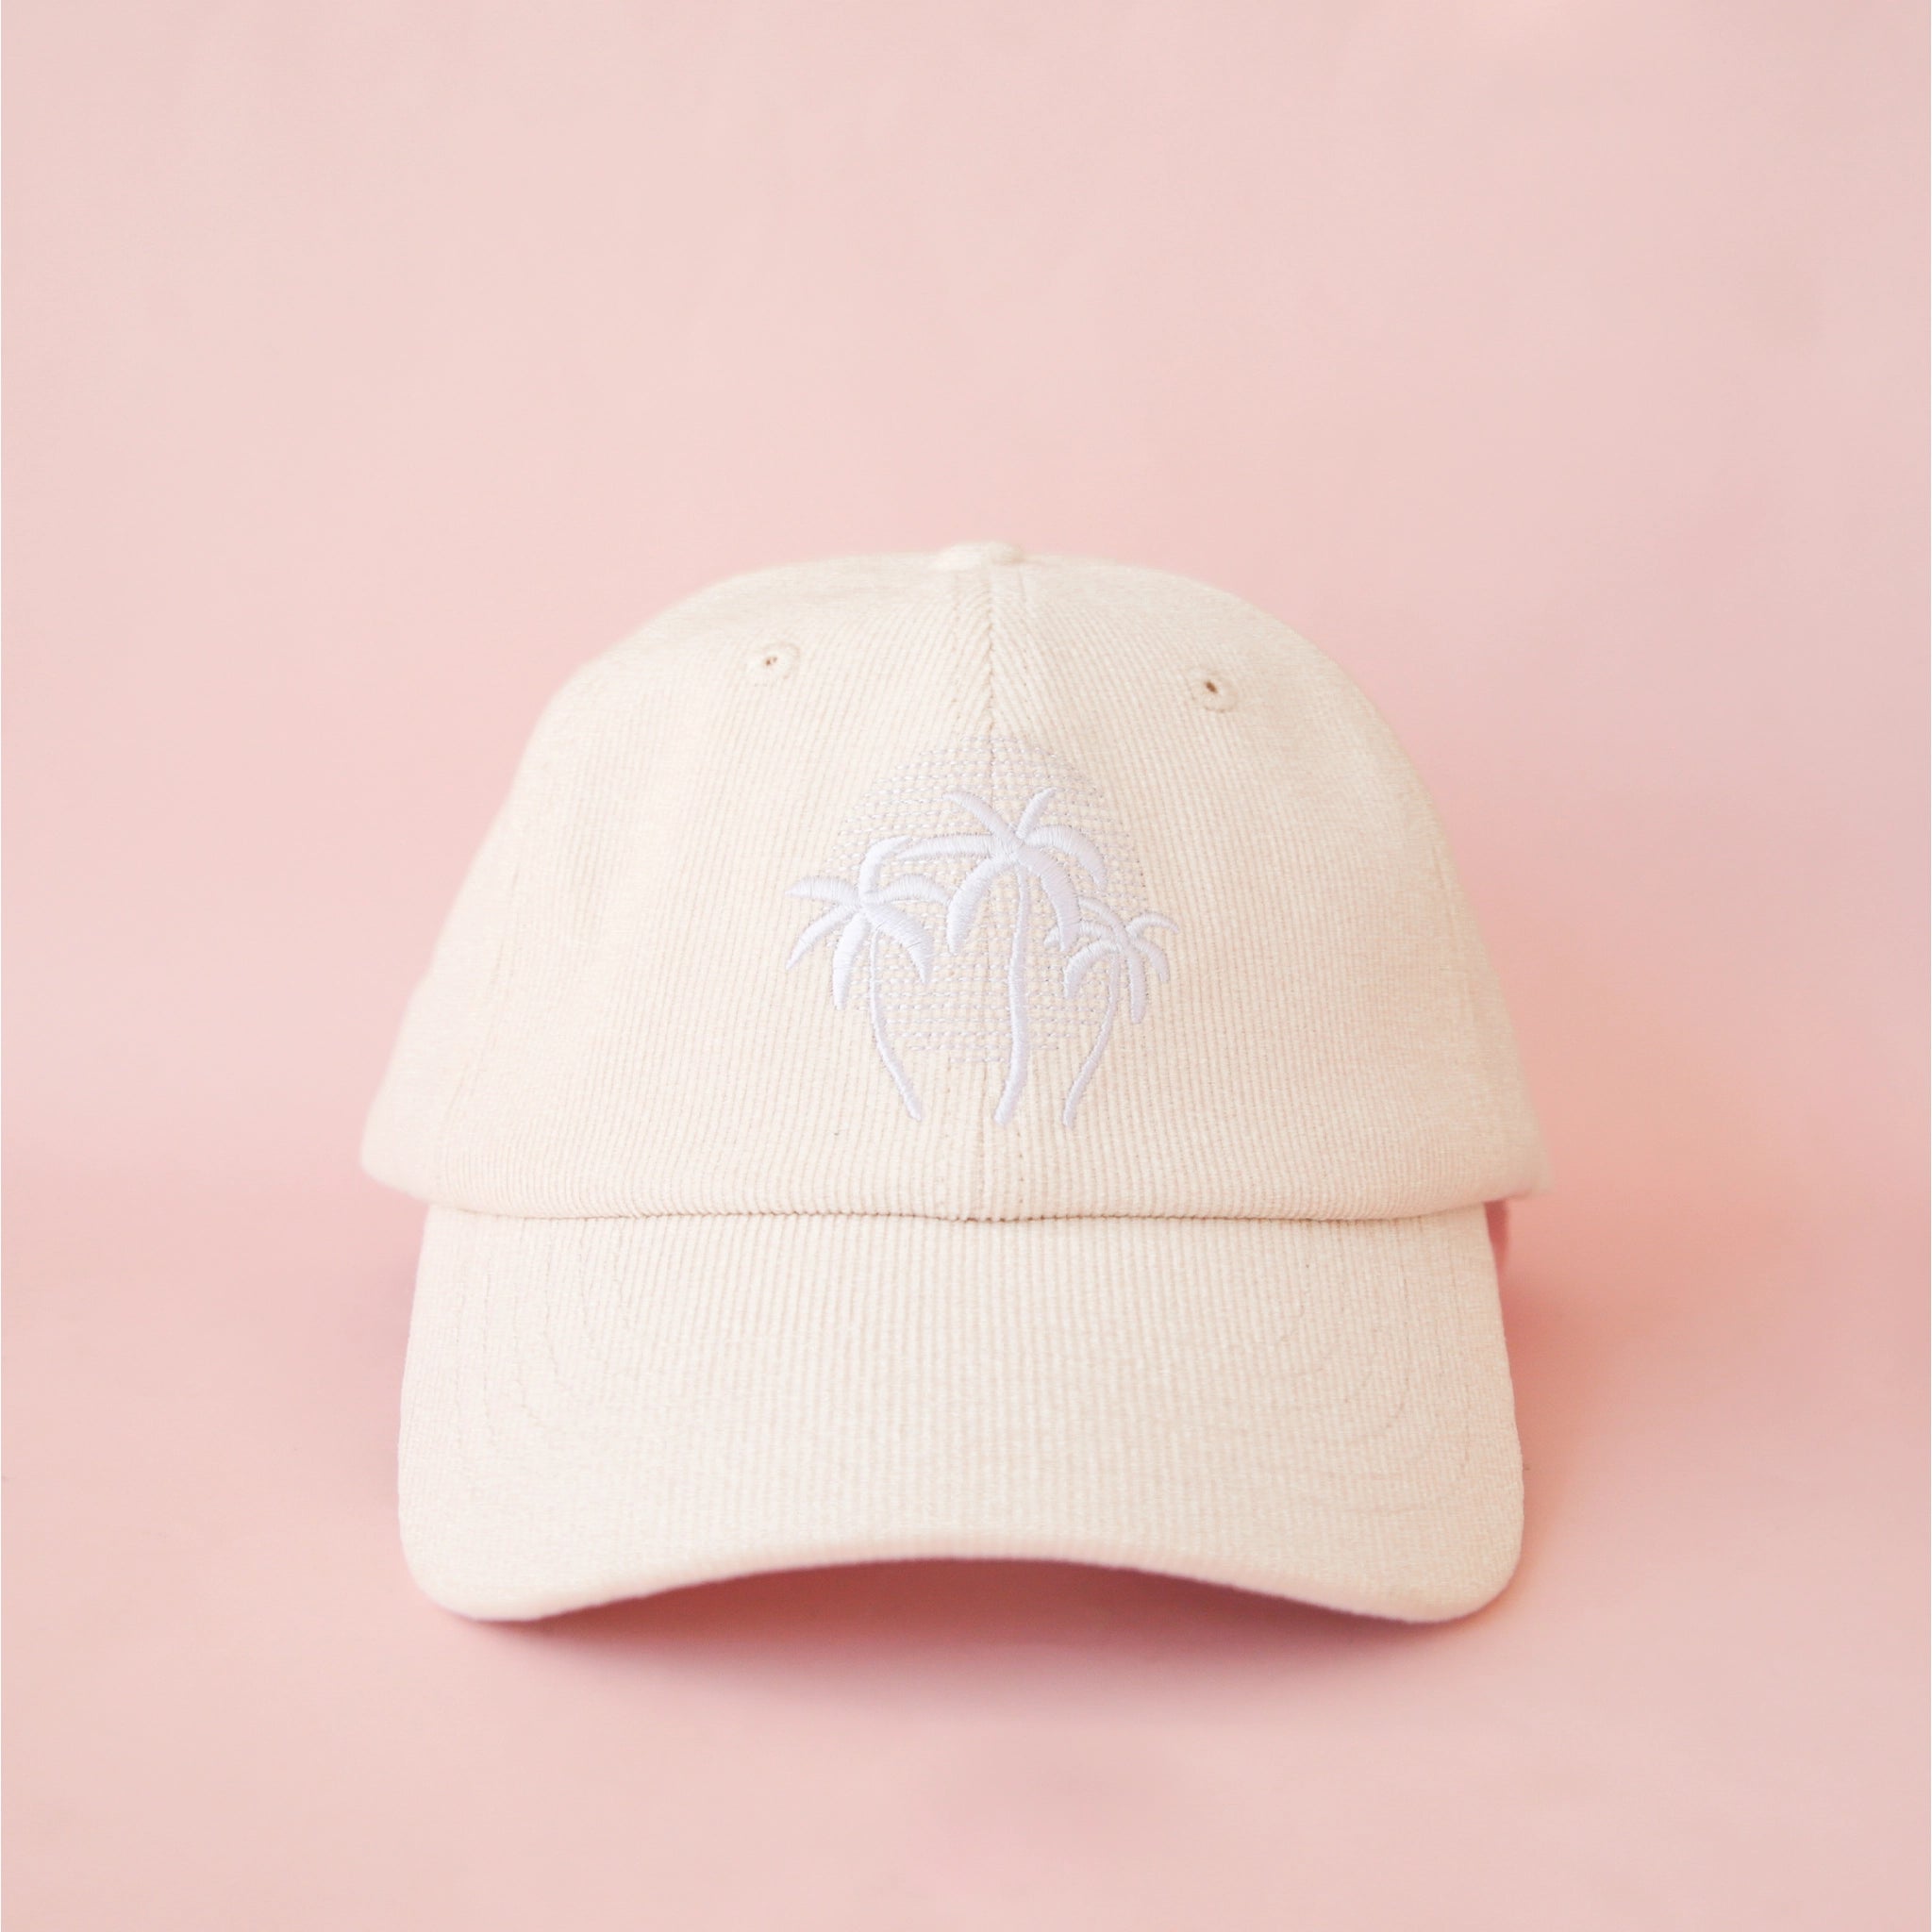 On a pink background is an ivory baseball hat with three palm tree logo in the center. 